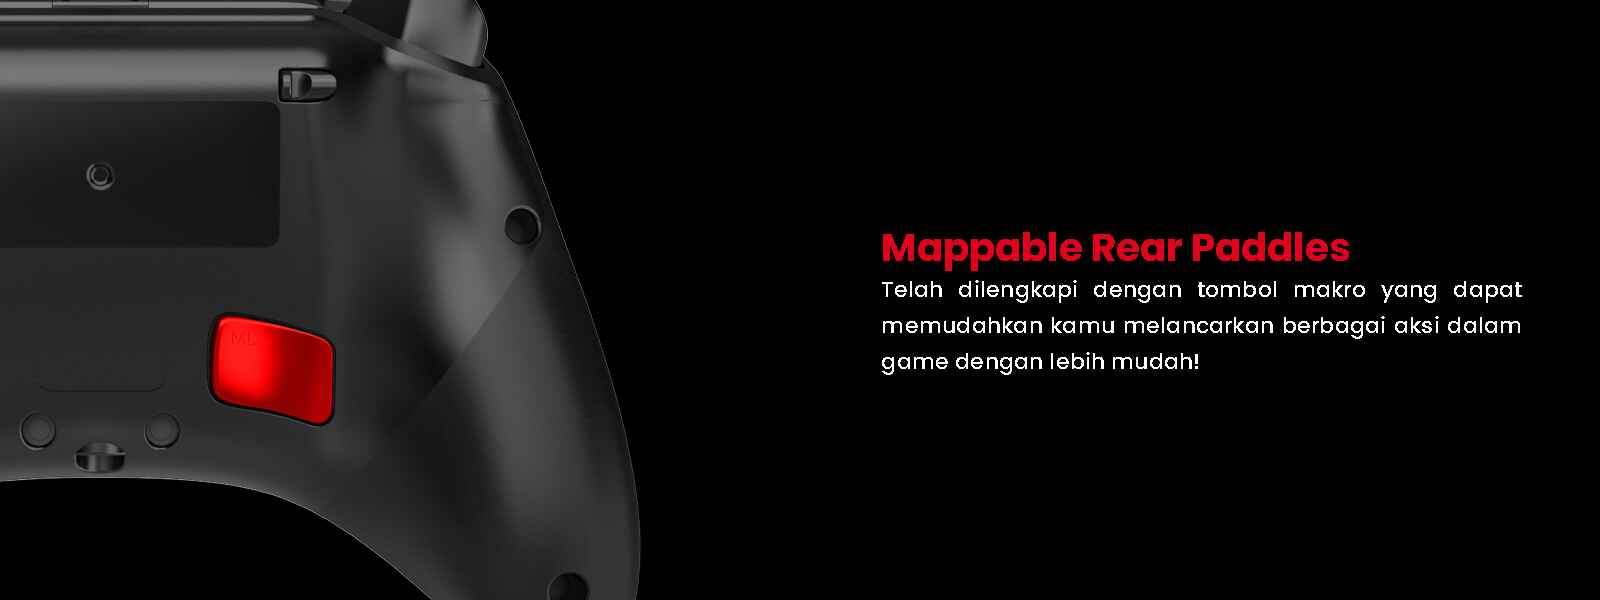 Mappable Rear Paddles